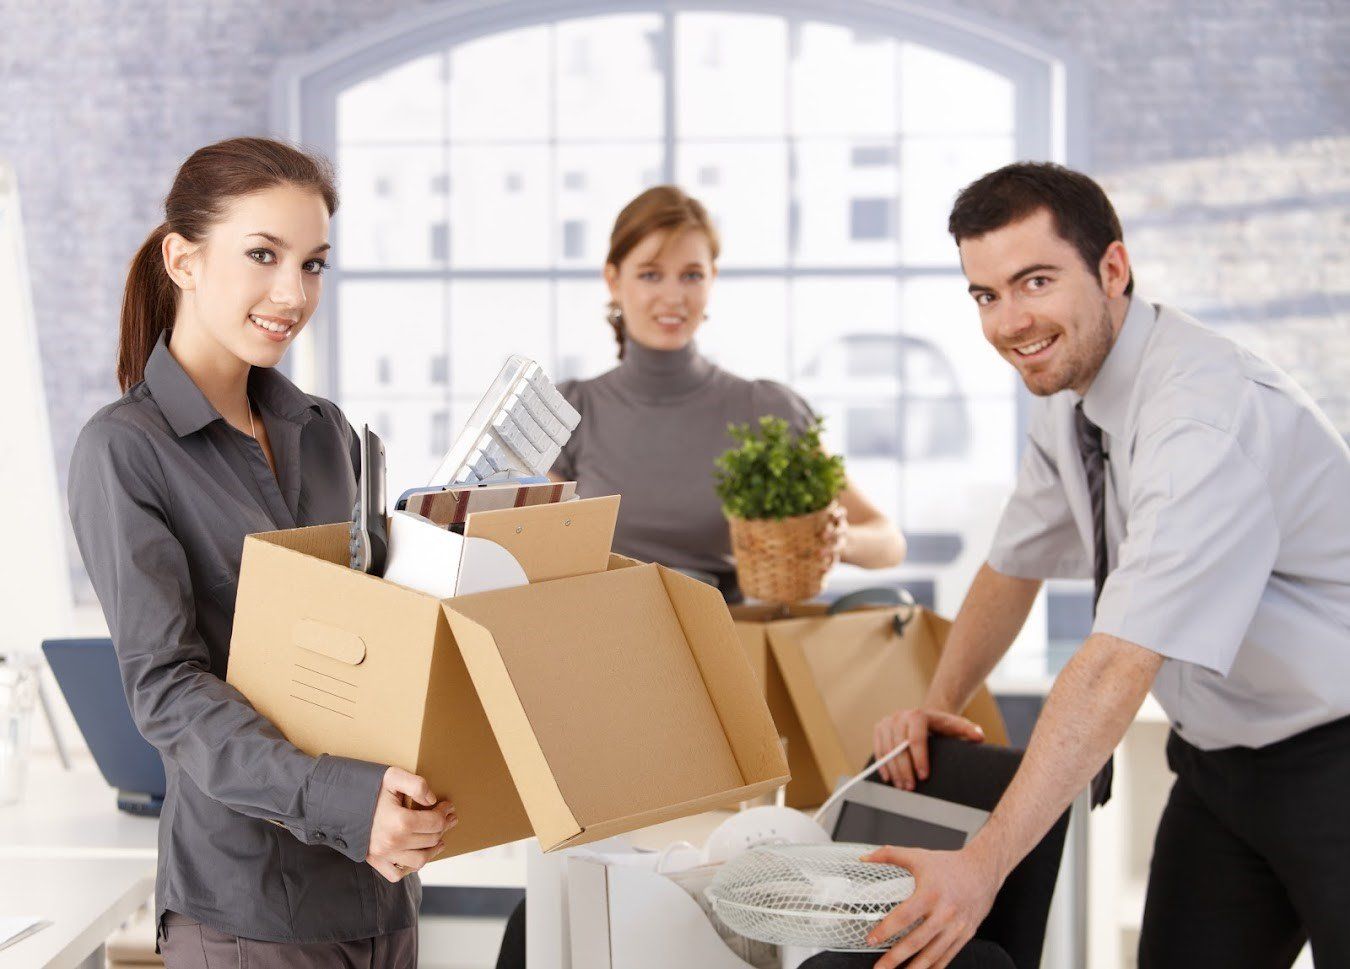 A team of movers, featuring two women holding boxes and a man, packing away office furniture together.